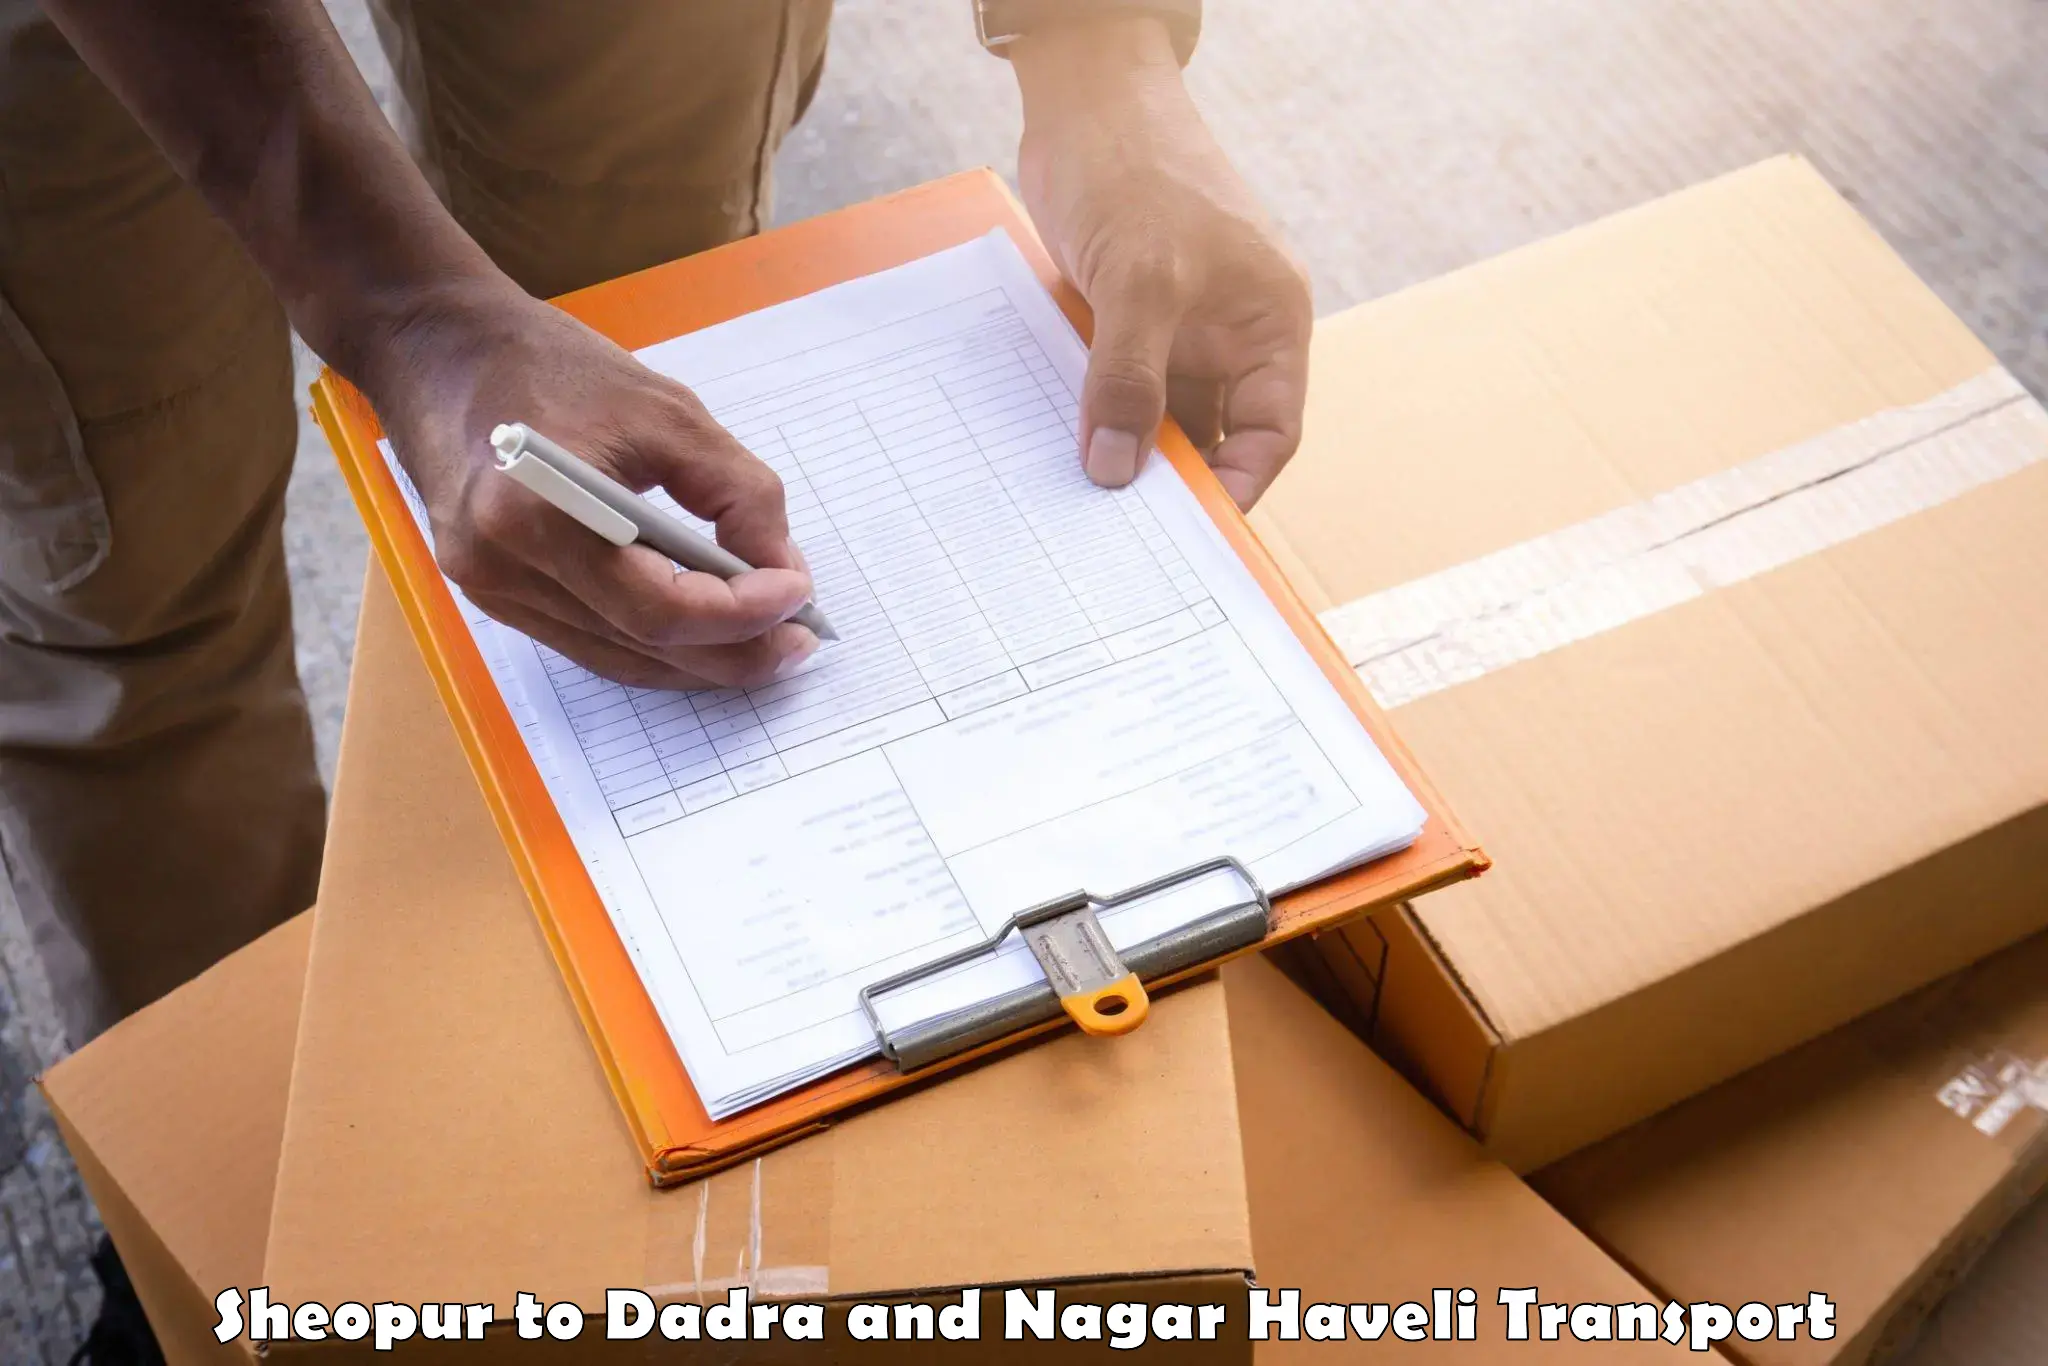 Road transport online services Sheopur to Dadra and Nagar Haveli